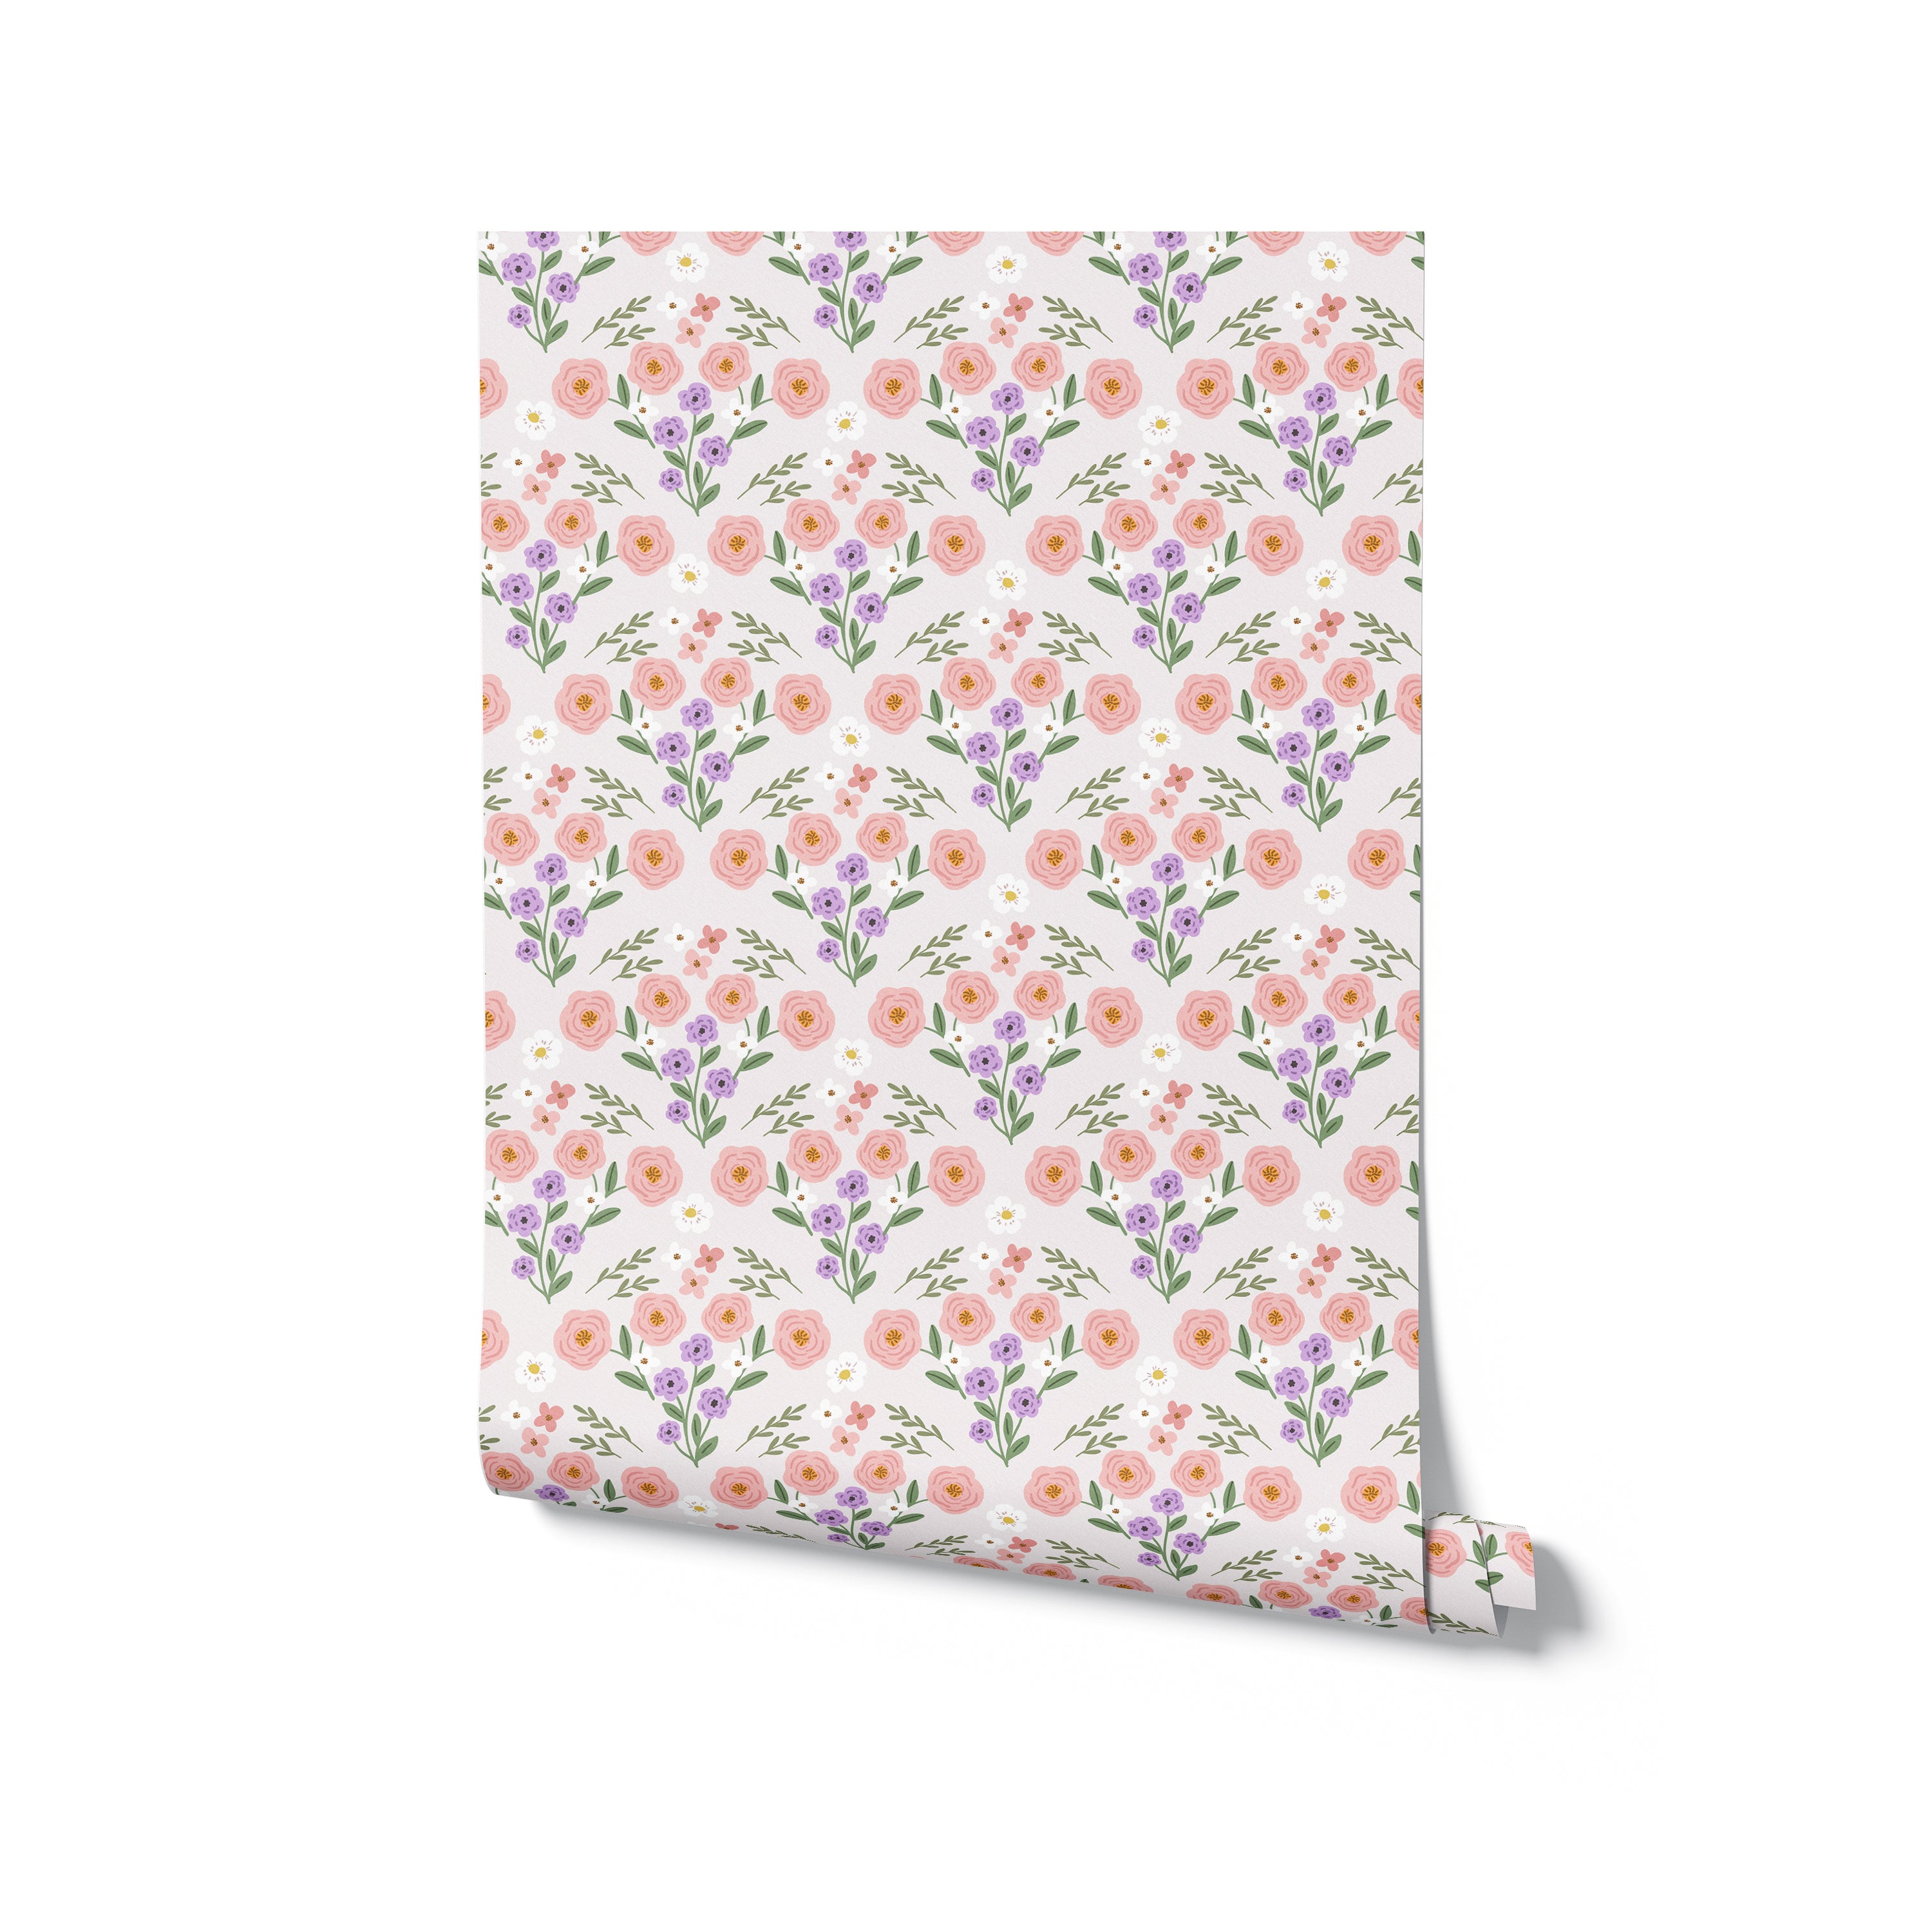 A roll of Fredlig Flowers Wallpaper displayed against a white background. The wallpaper features a delightful pattern of pink roses, purple flowers, and small white blossoms scattered across a soft white base, perfect for adding a floral elegance to home interiors.